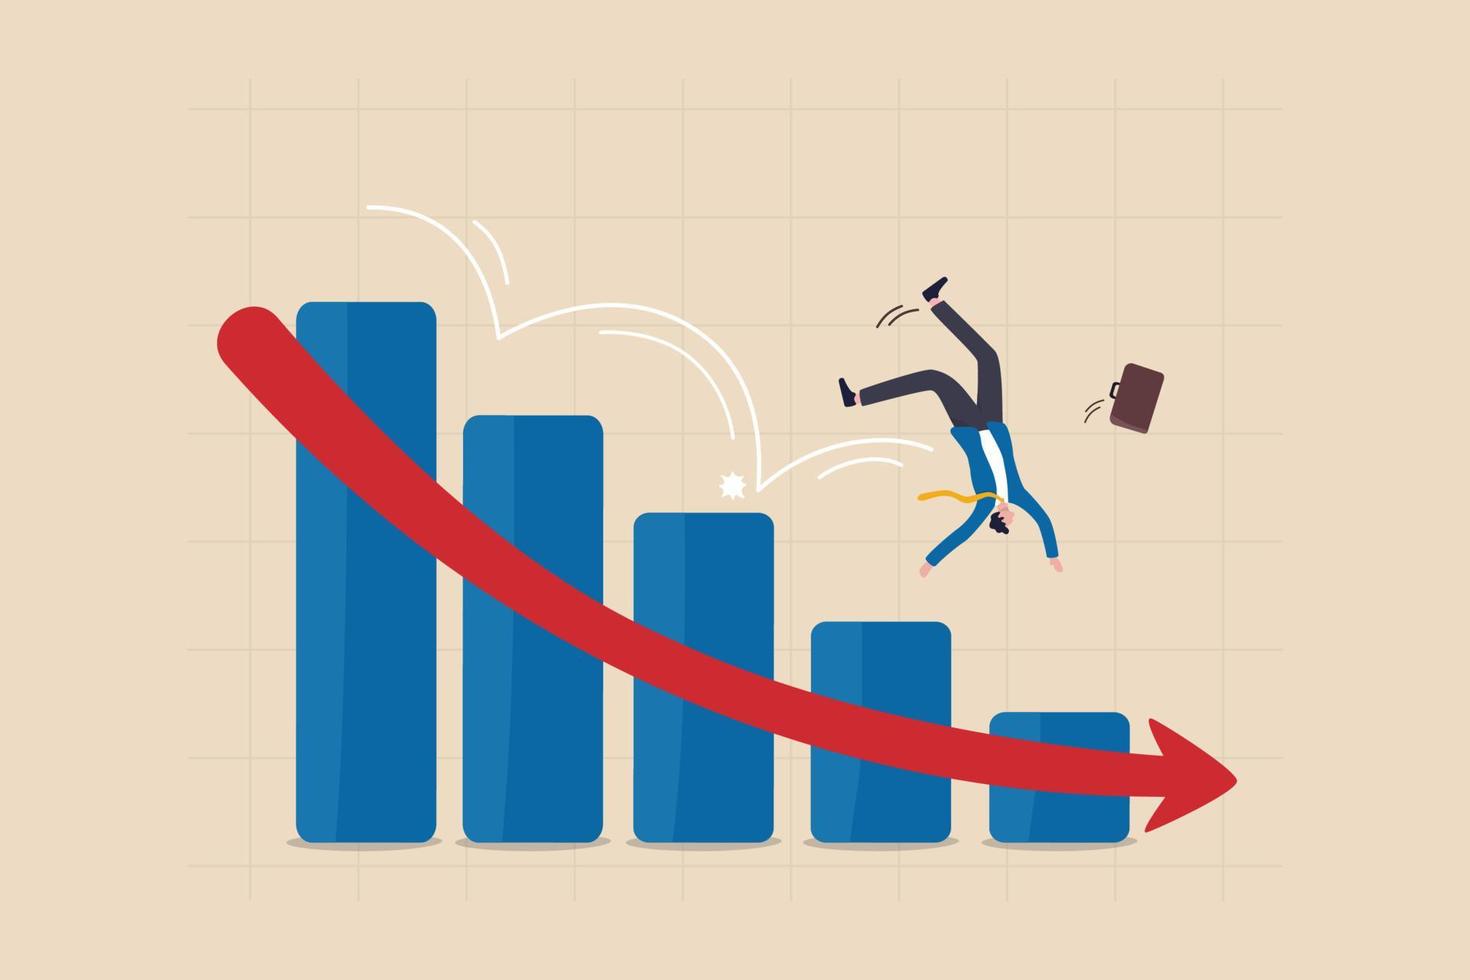 Stock market plunged falling down, economic crash, investing failure or mistake, price drop, recession, investment risk concept, businessman investor slip on stock market graph fall down to the floor. vector